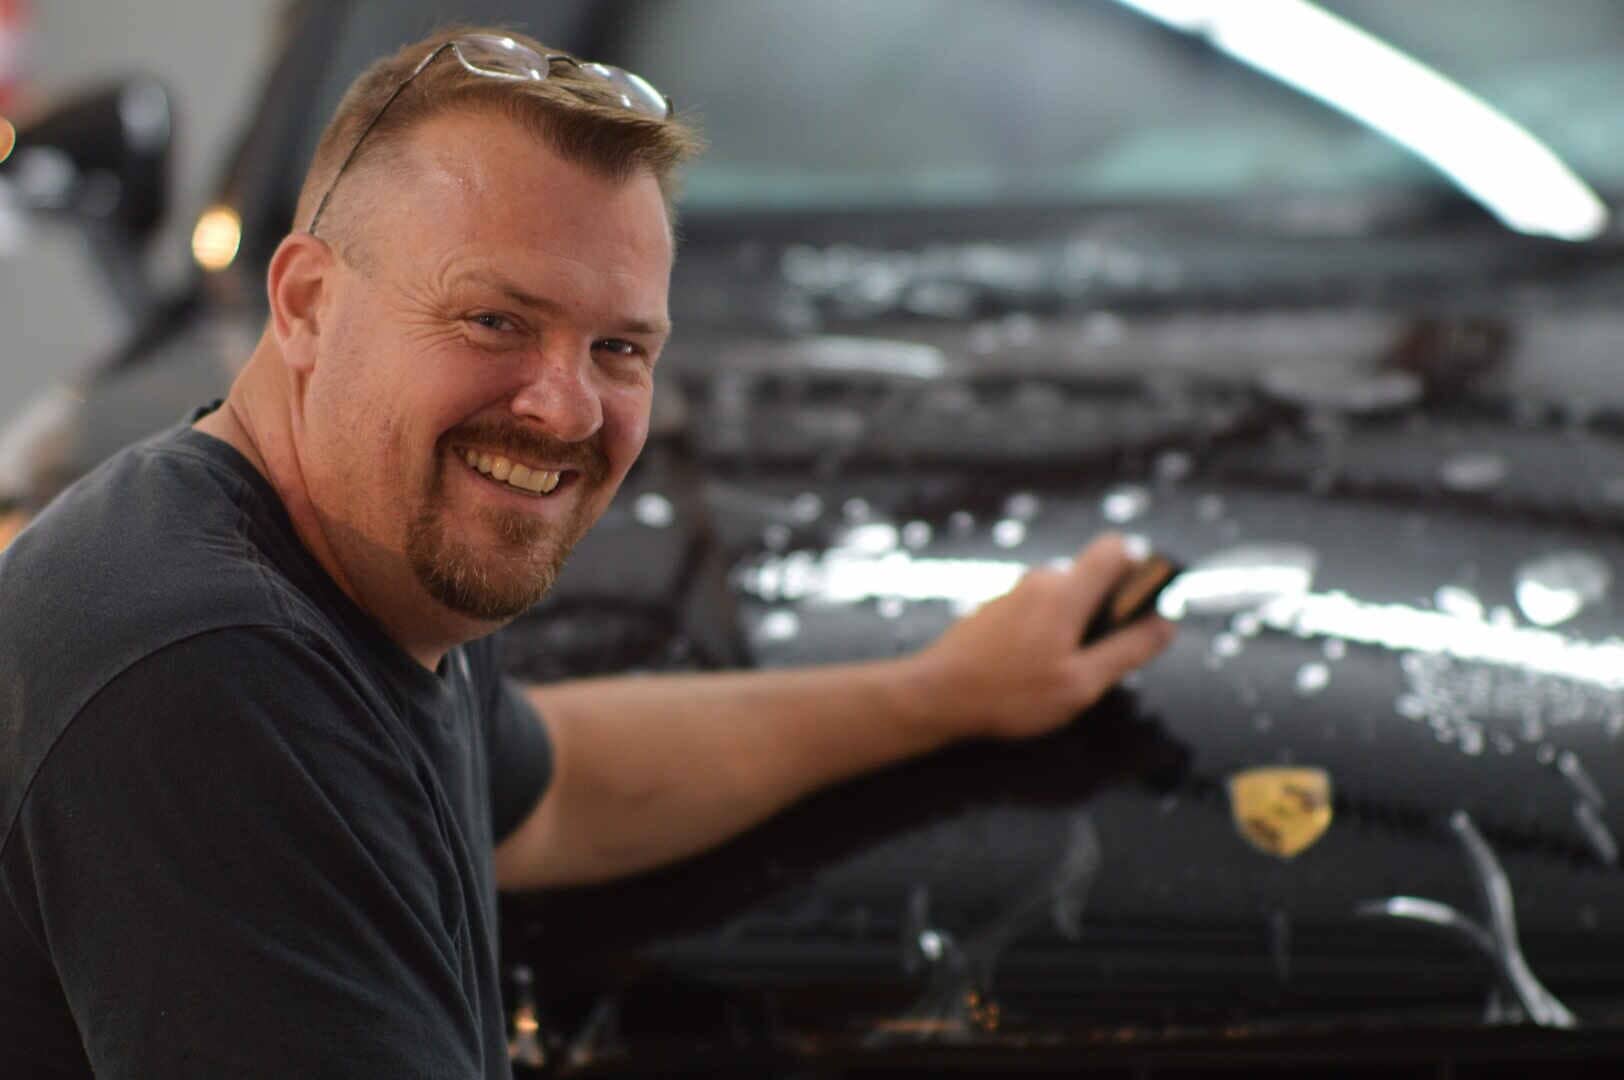 Coating Car — Happy Worker in Asheville, NC